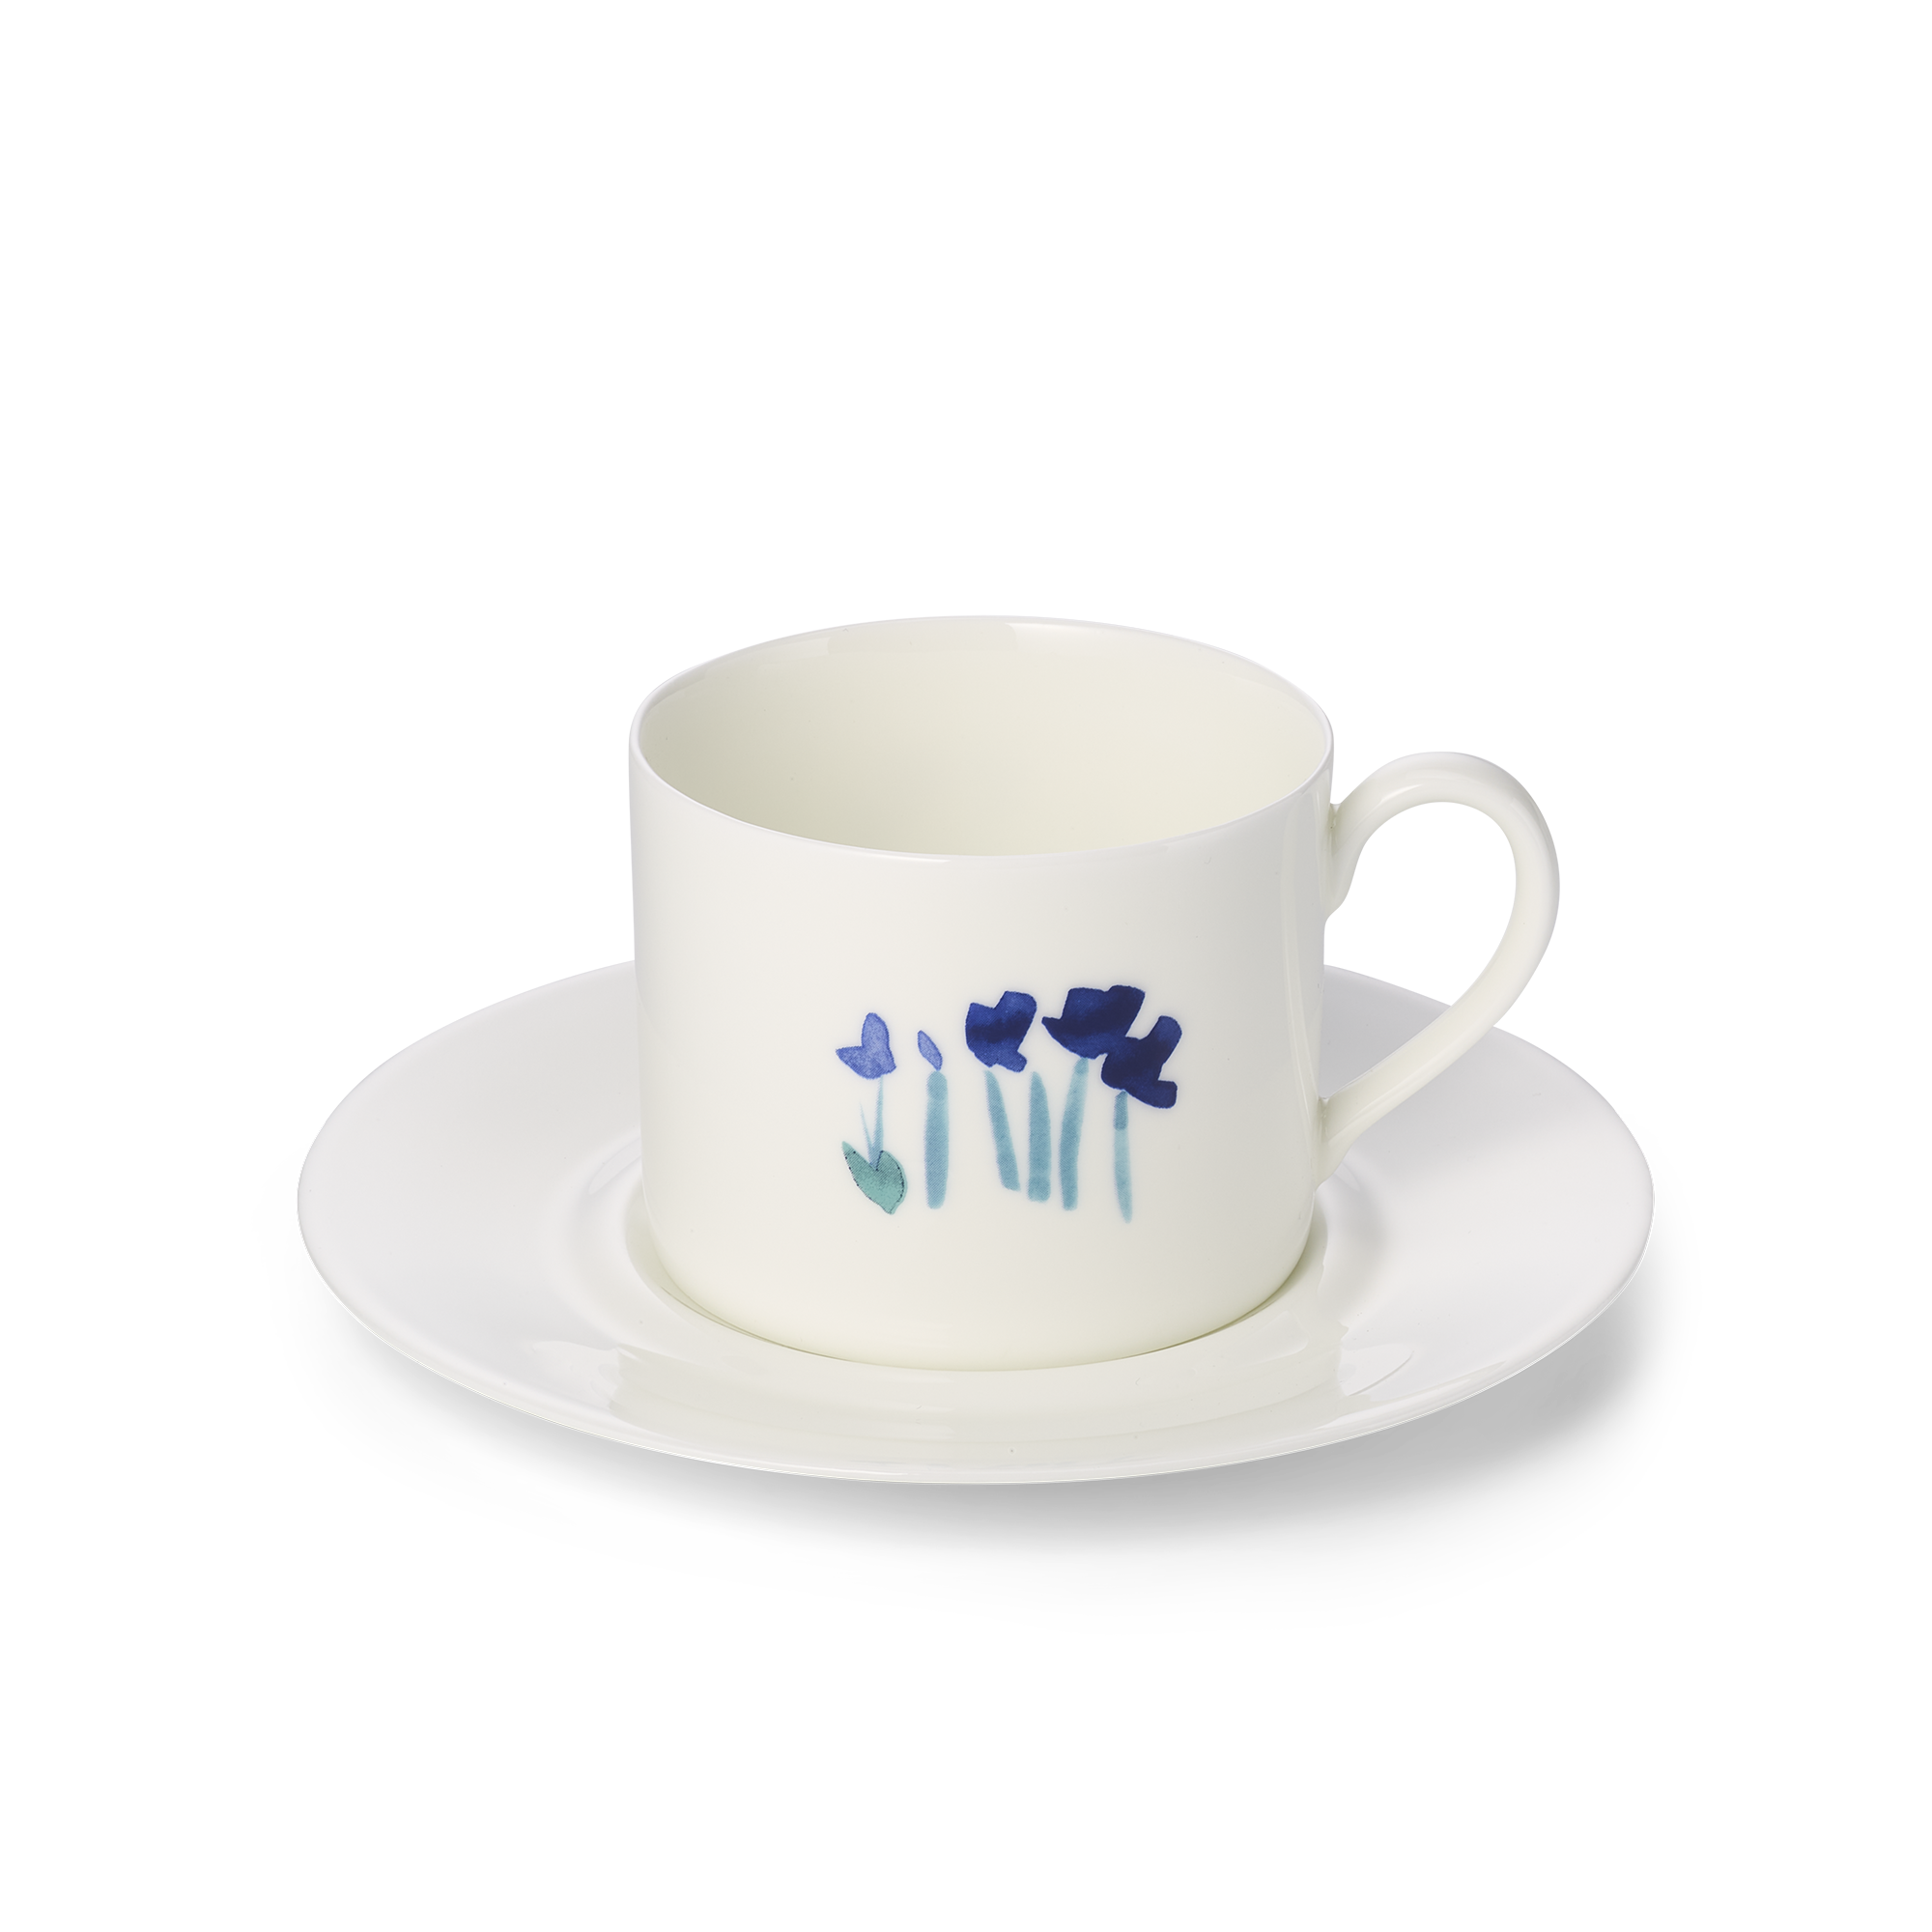 Coffee cup Impression blue, saucer flat